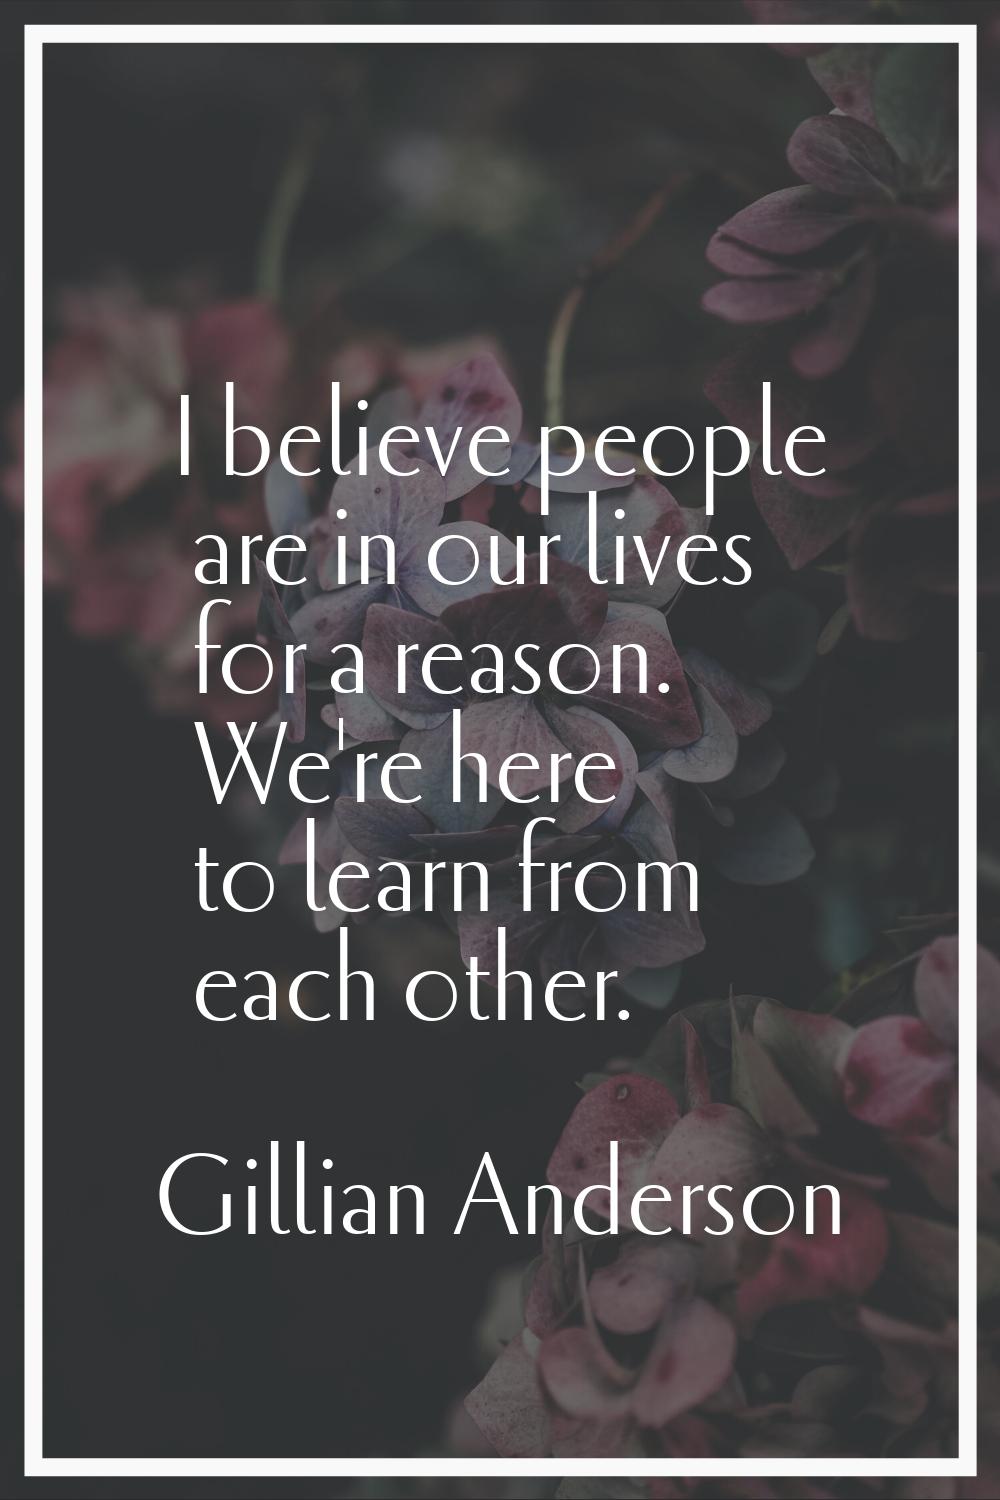 I believe people are in our lives for a reason. We're here to learn from each other.